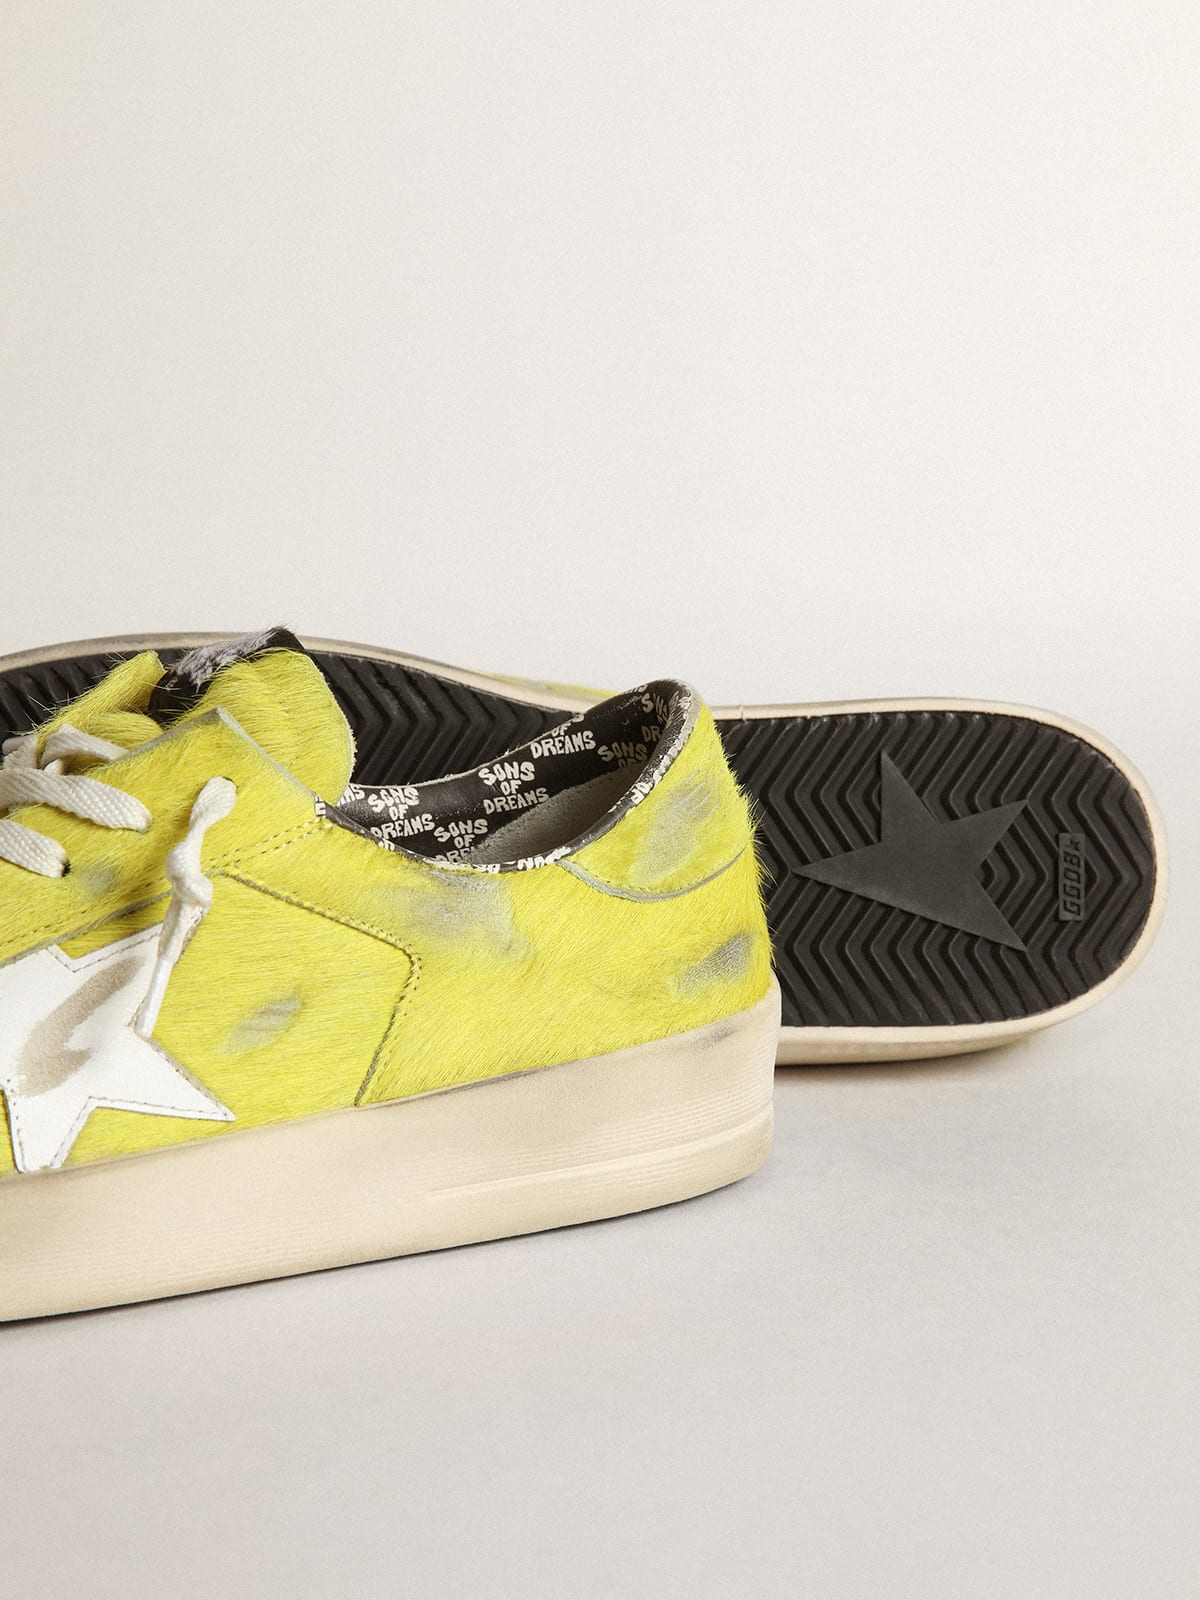 Golden Goose - Men’s Stardan sneakers in fluorescent yellow pony skin with white leather star in 